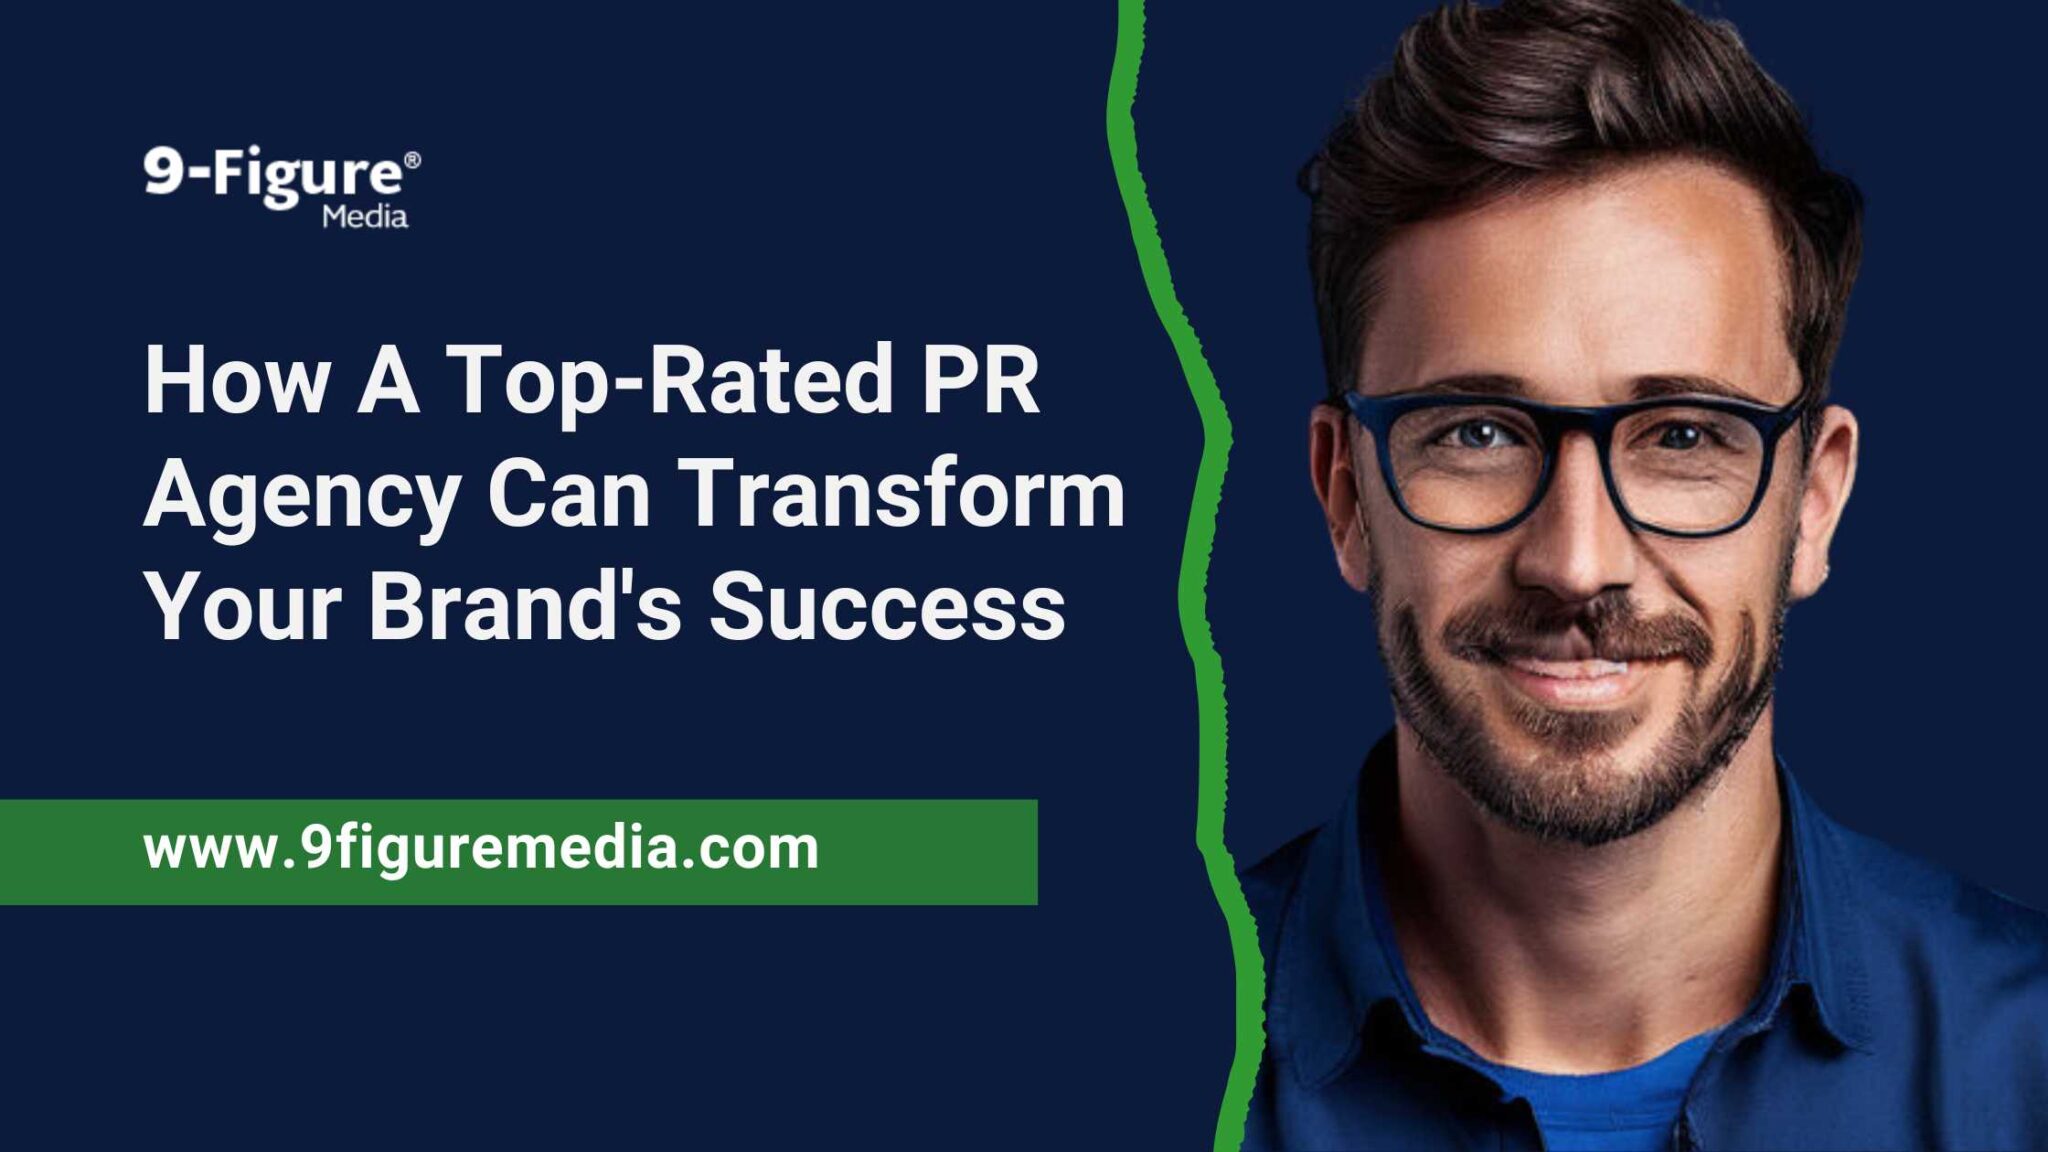 How A Top-Rated PR Agency Can Transform Your Brand's Success